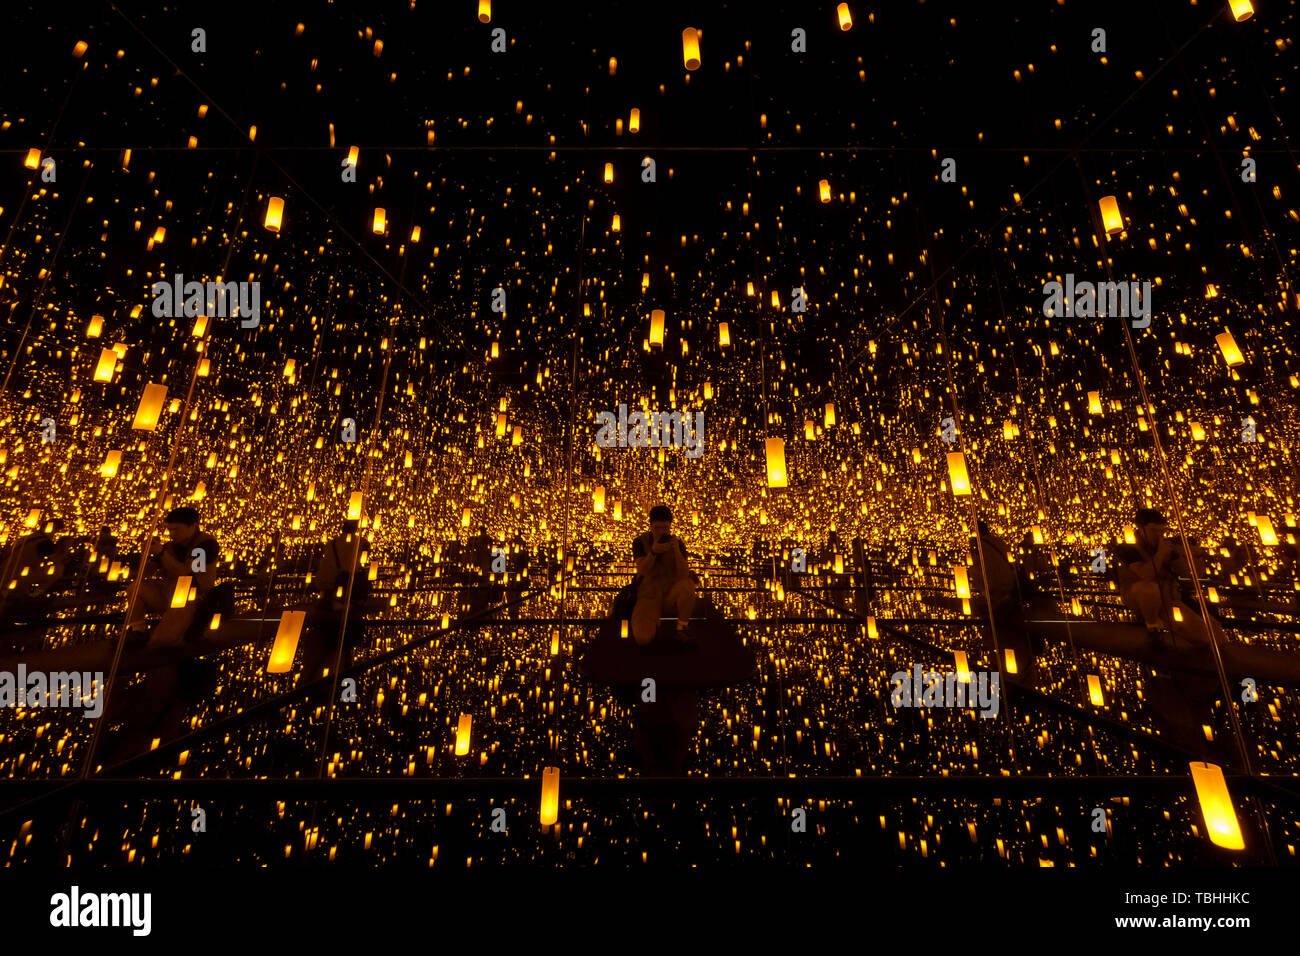 Las Vegas, APR 28: The famous Infinity Mirrored Room showing in Bellagio Gallery of Fine Art on APR 28, 2019 at Las Vegas, Nevada Stock Photo